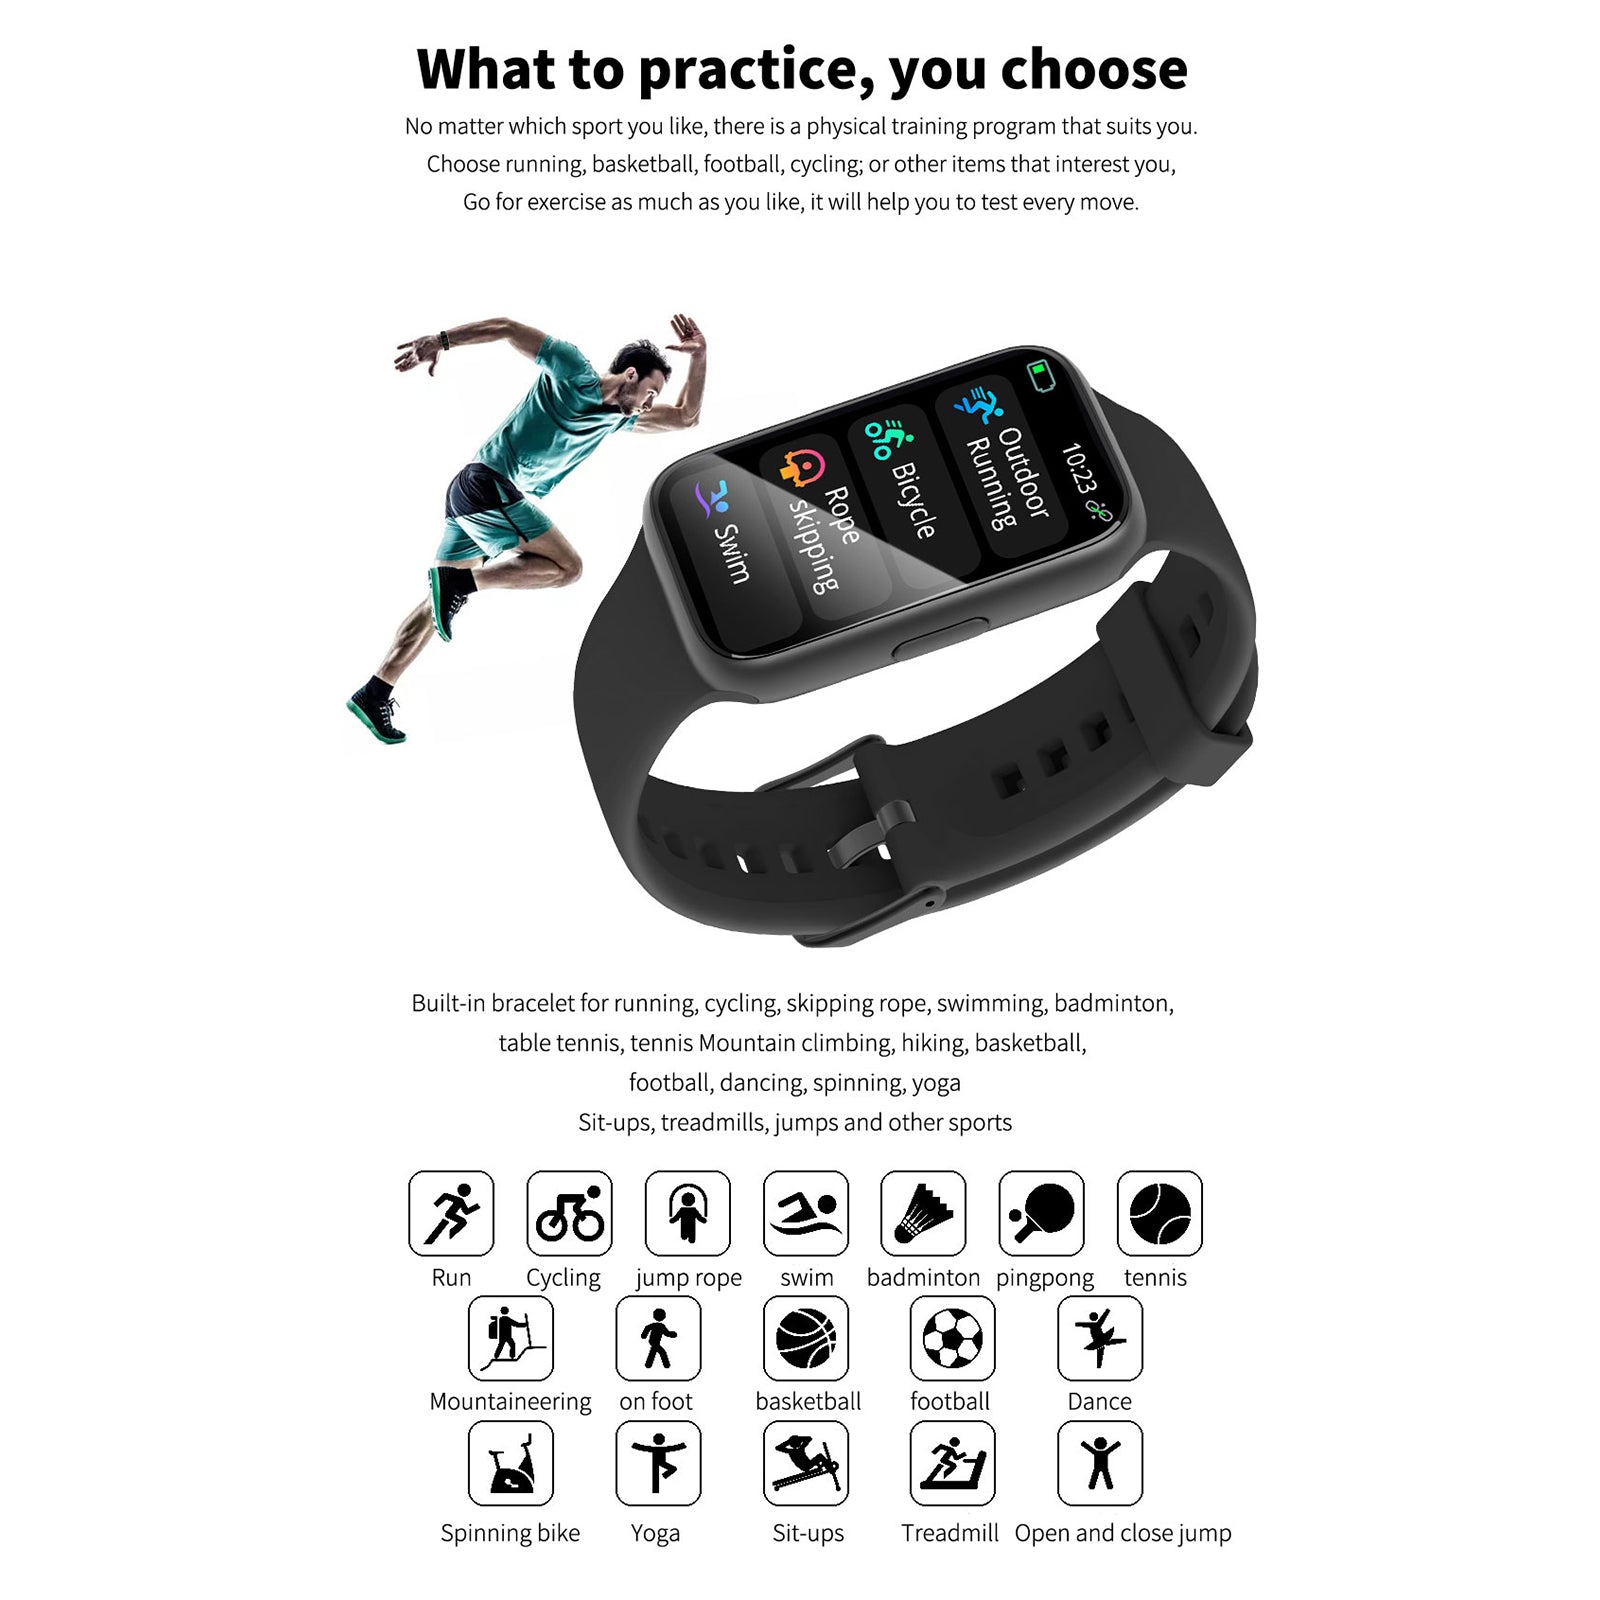 Smart Watch for Women Men 1.47 Touch Screen Smartwatch for Android Phones IOS Fitness Tracker Watch